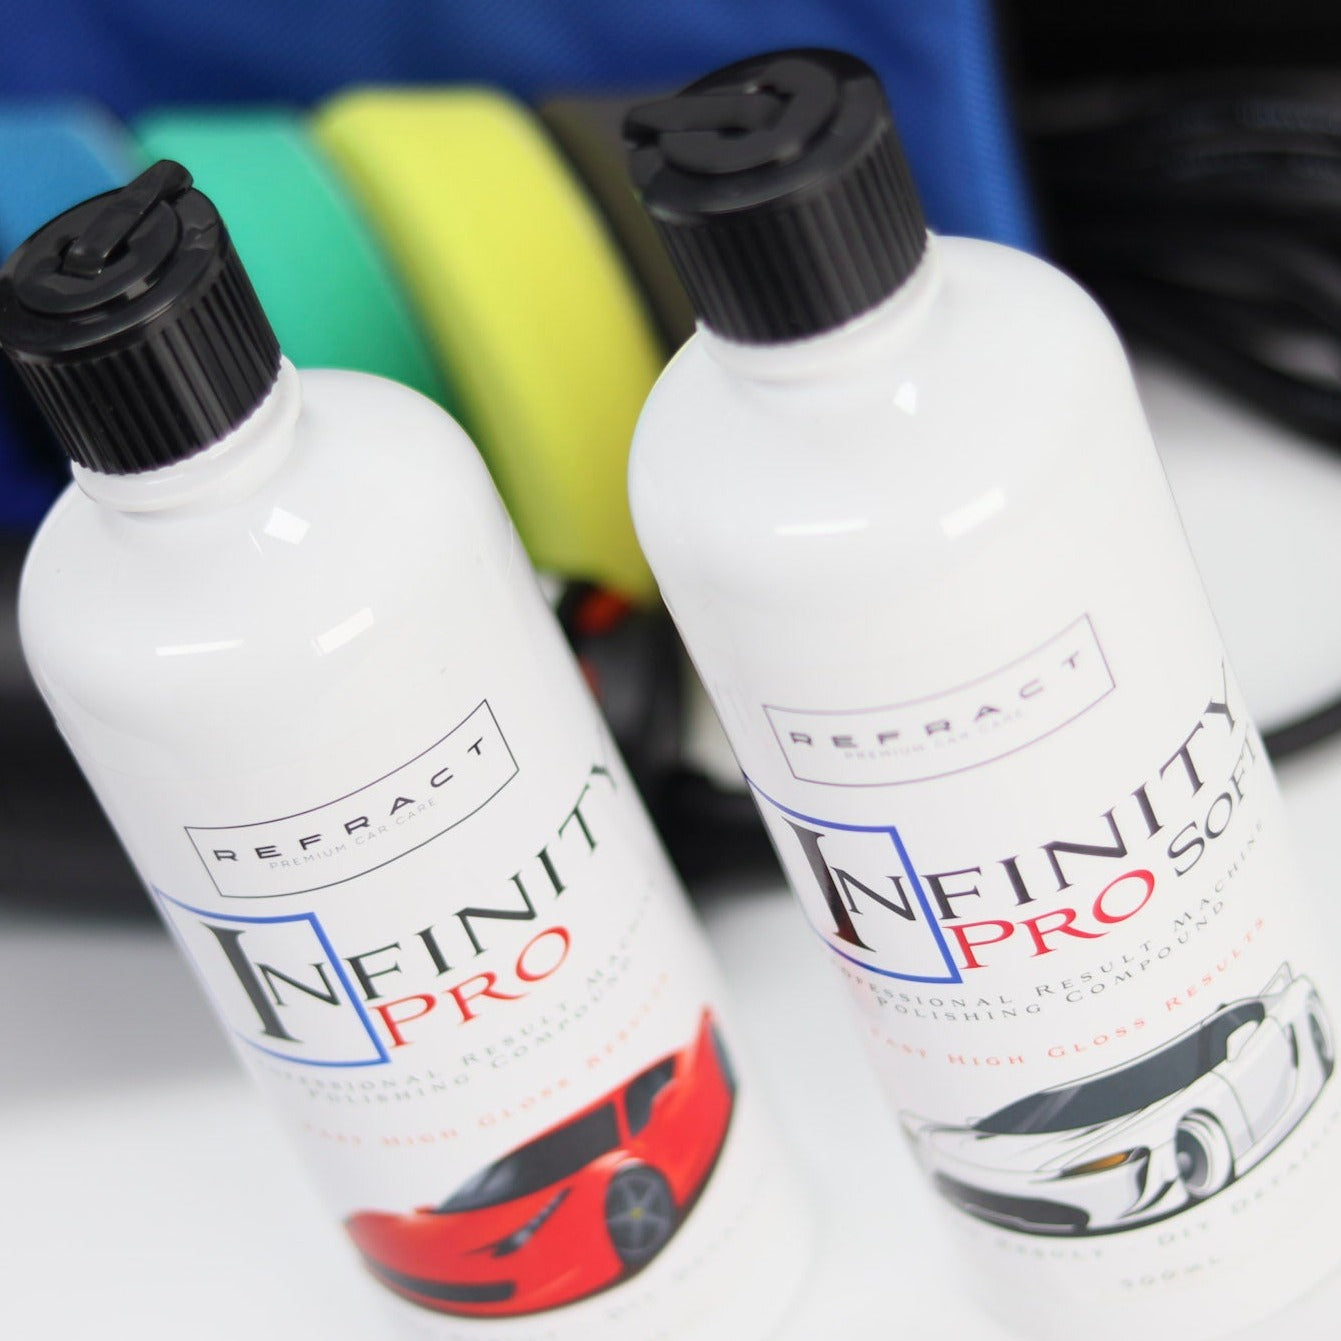 Refract Premium Car Care Products Refract Forced Drive - Dual Action Machine Polishers $389.95